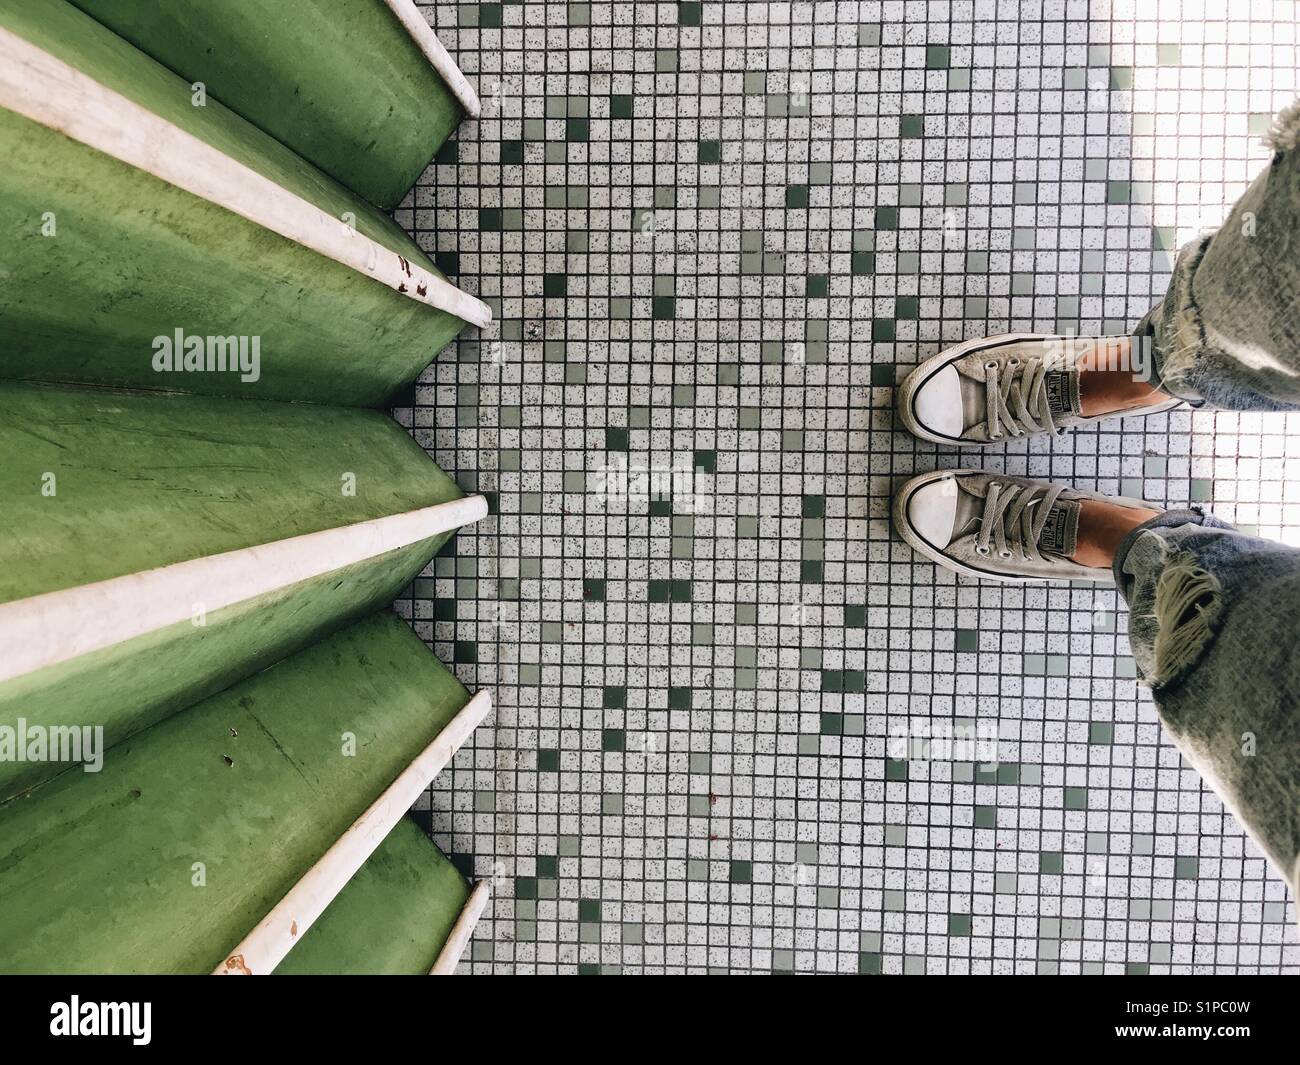 beautiful floor with converses on Stock Photo